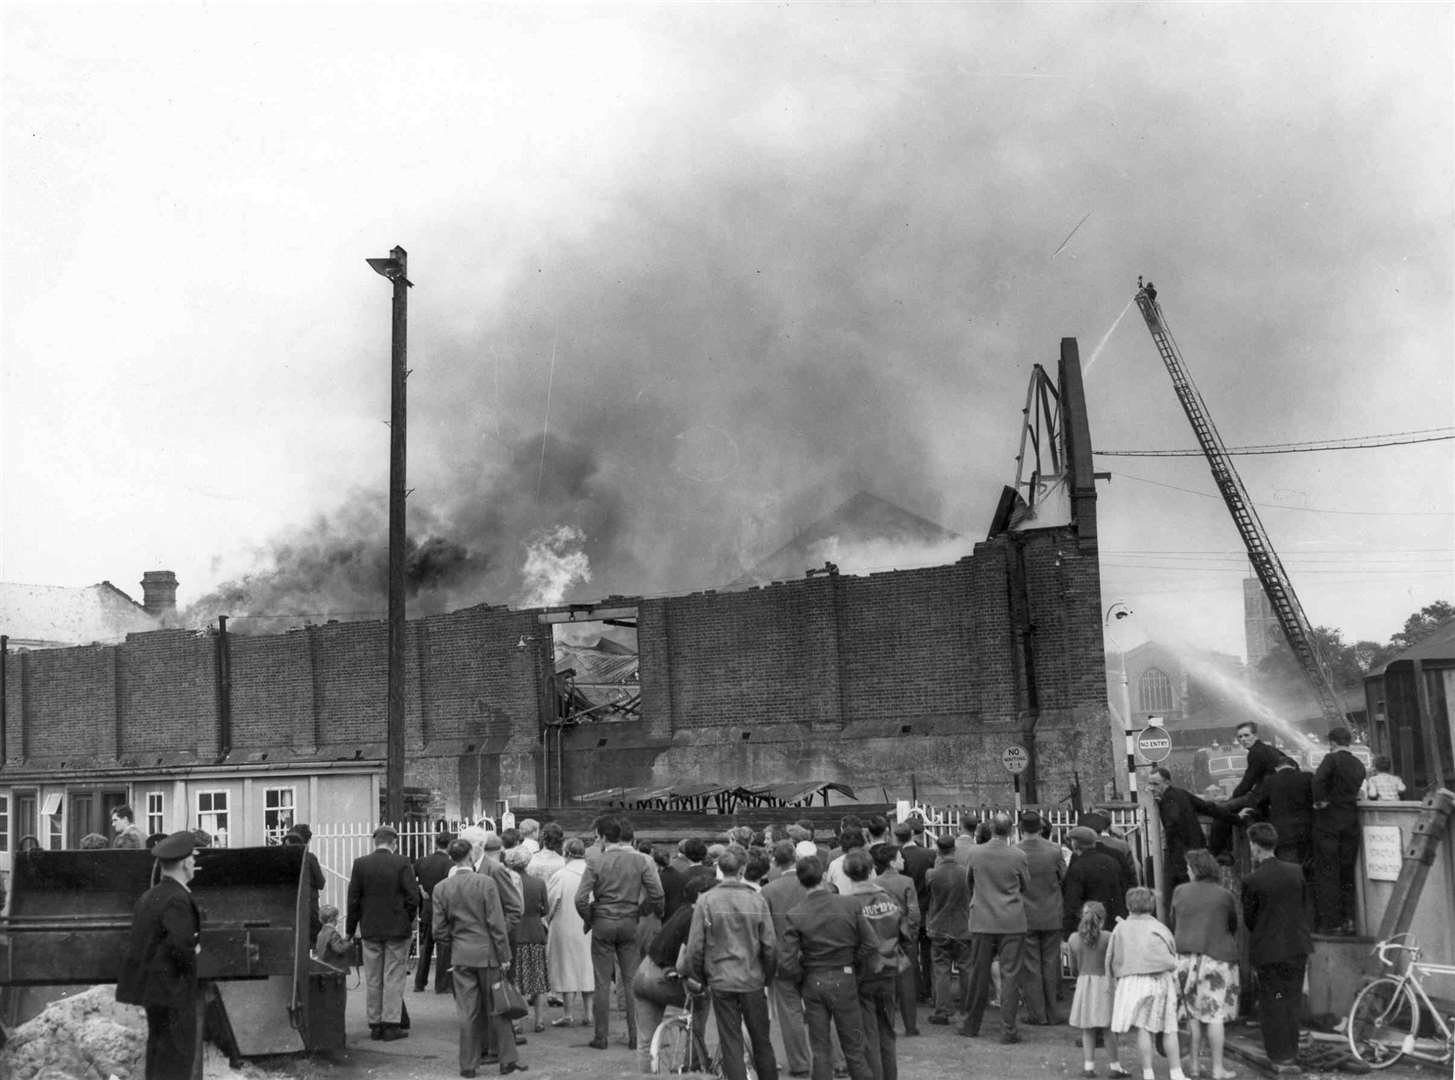 Foster Clark's printing works in Maidstone suffered badly from a fire in August 1961